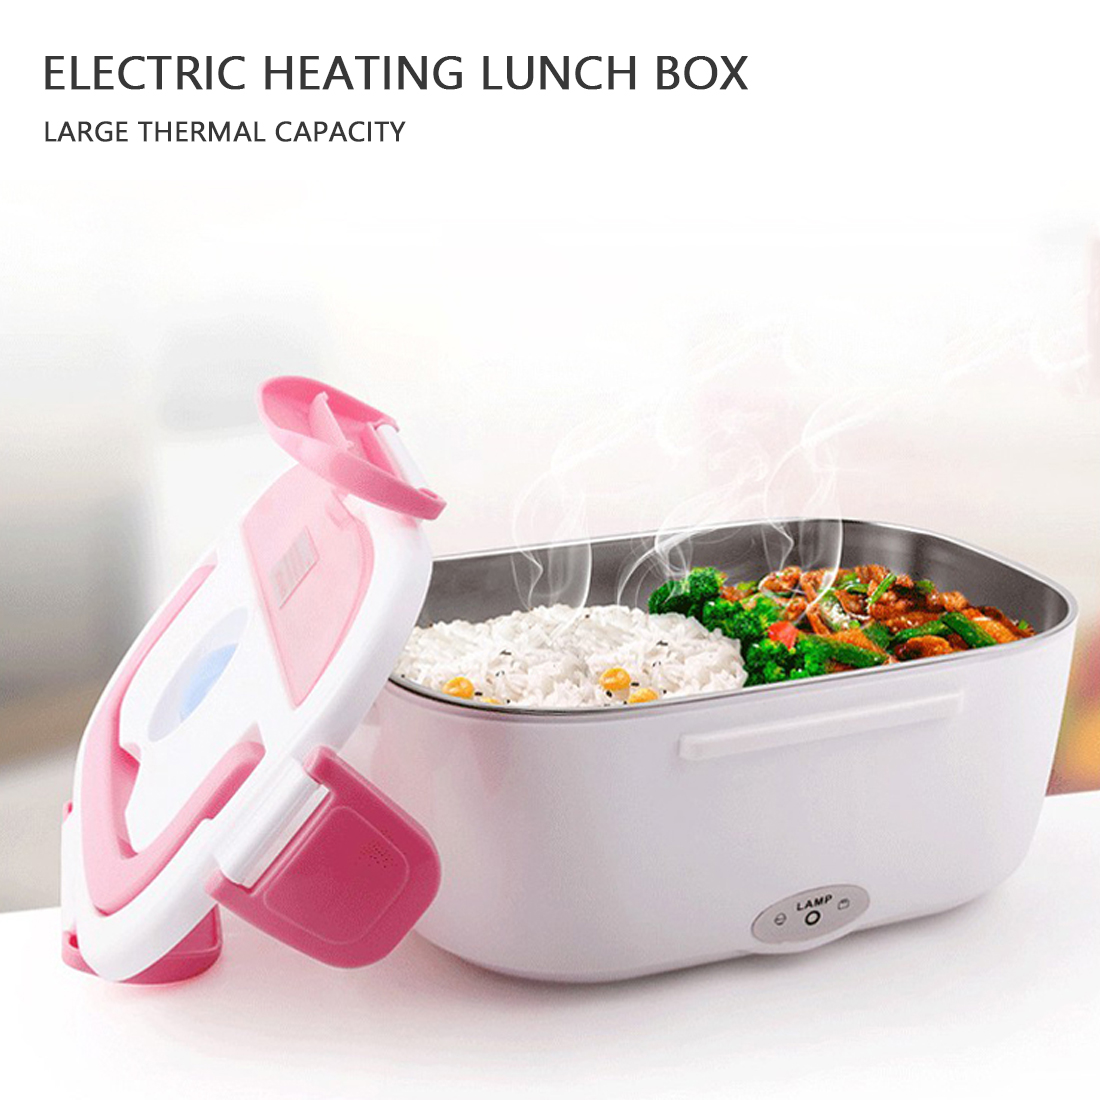 220v 2 in1 Home Electric Thermal Lunch Box Car Electric Heating Lunch Box 12V